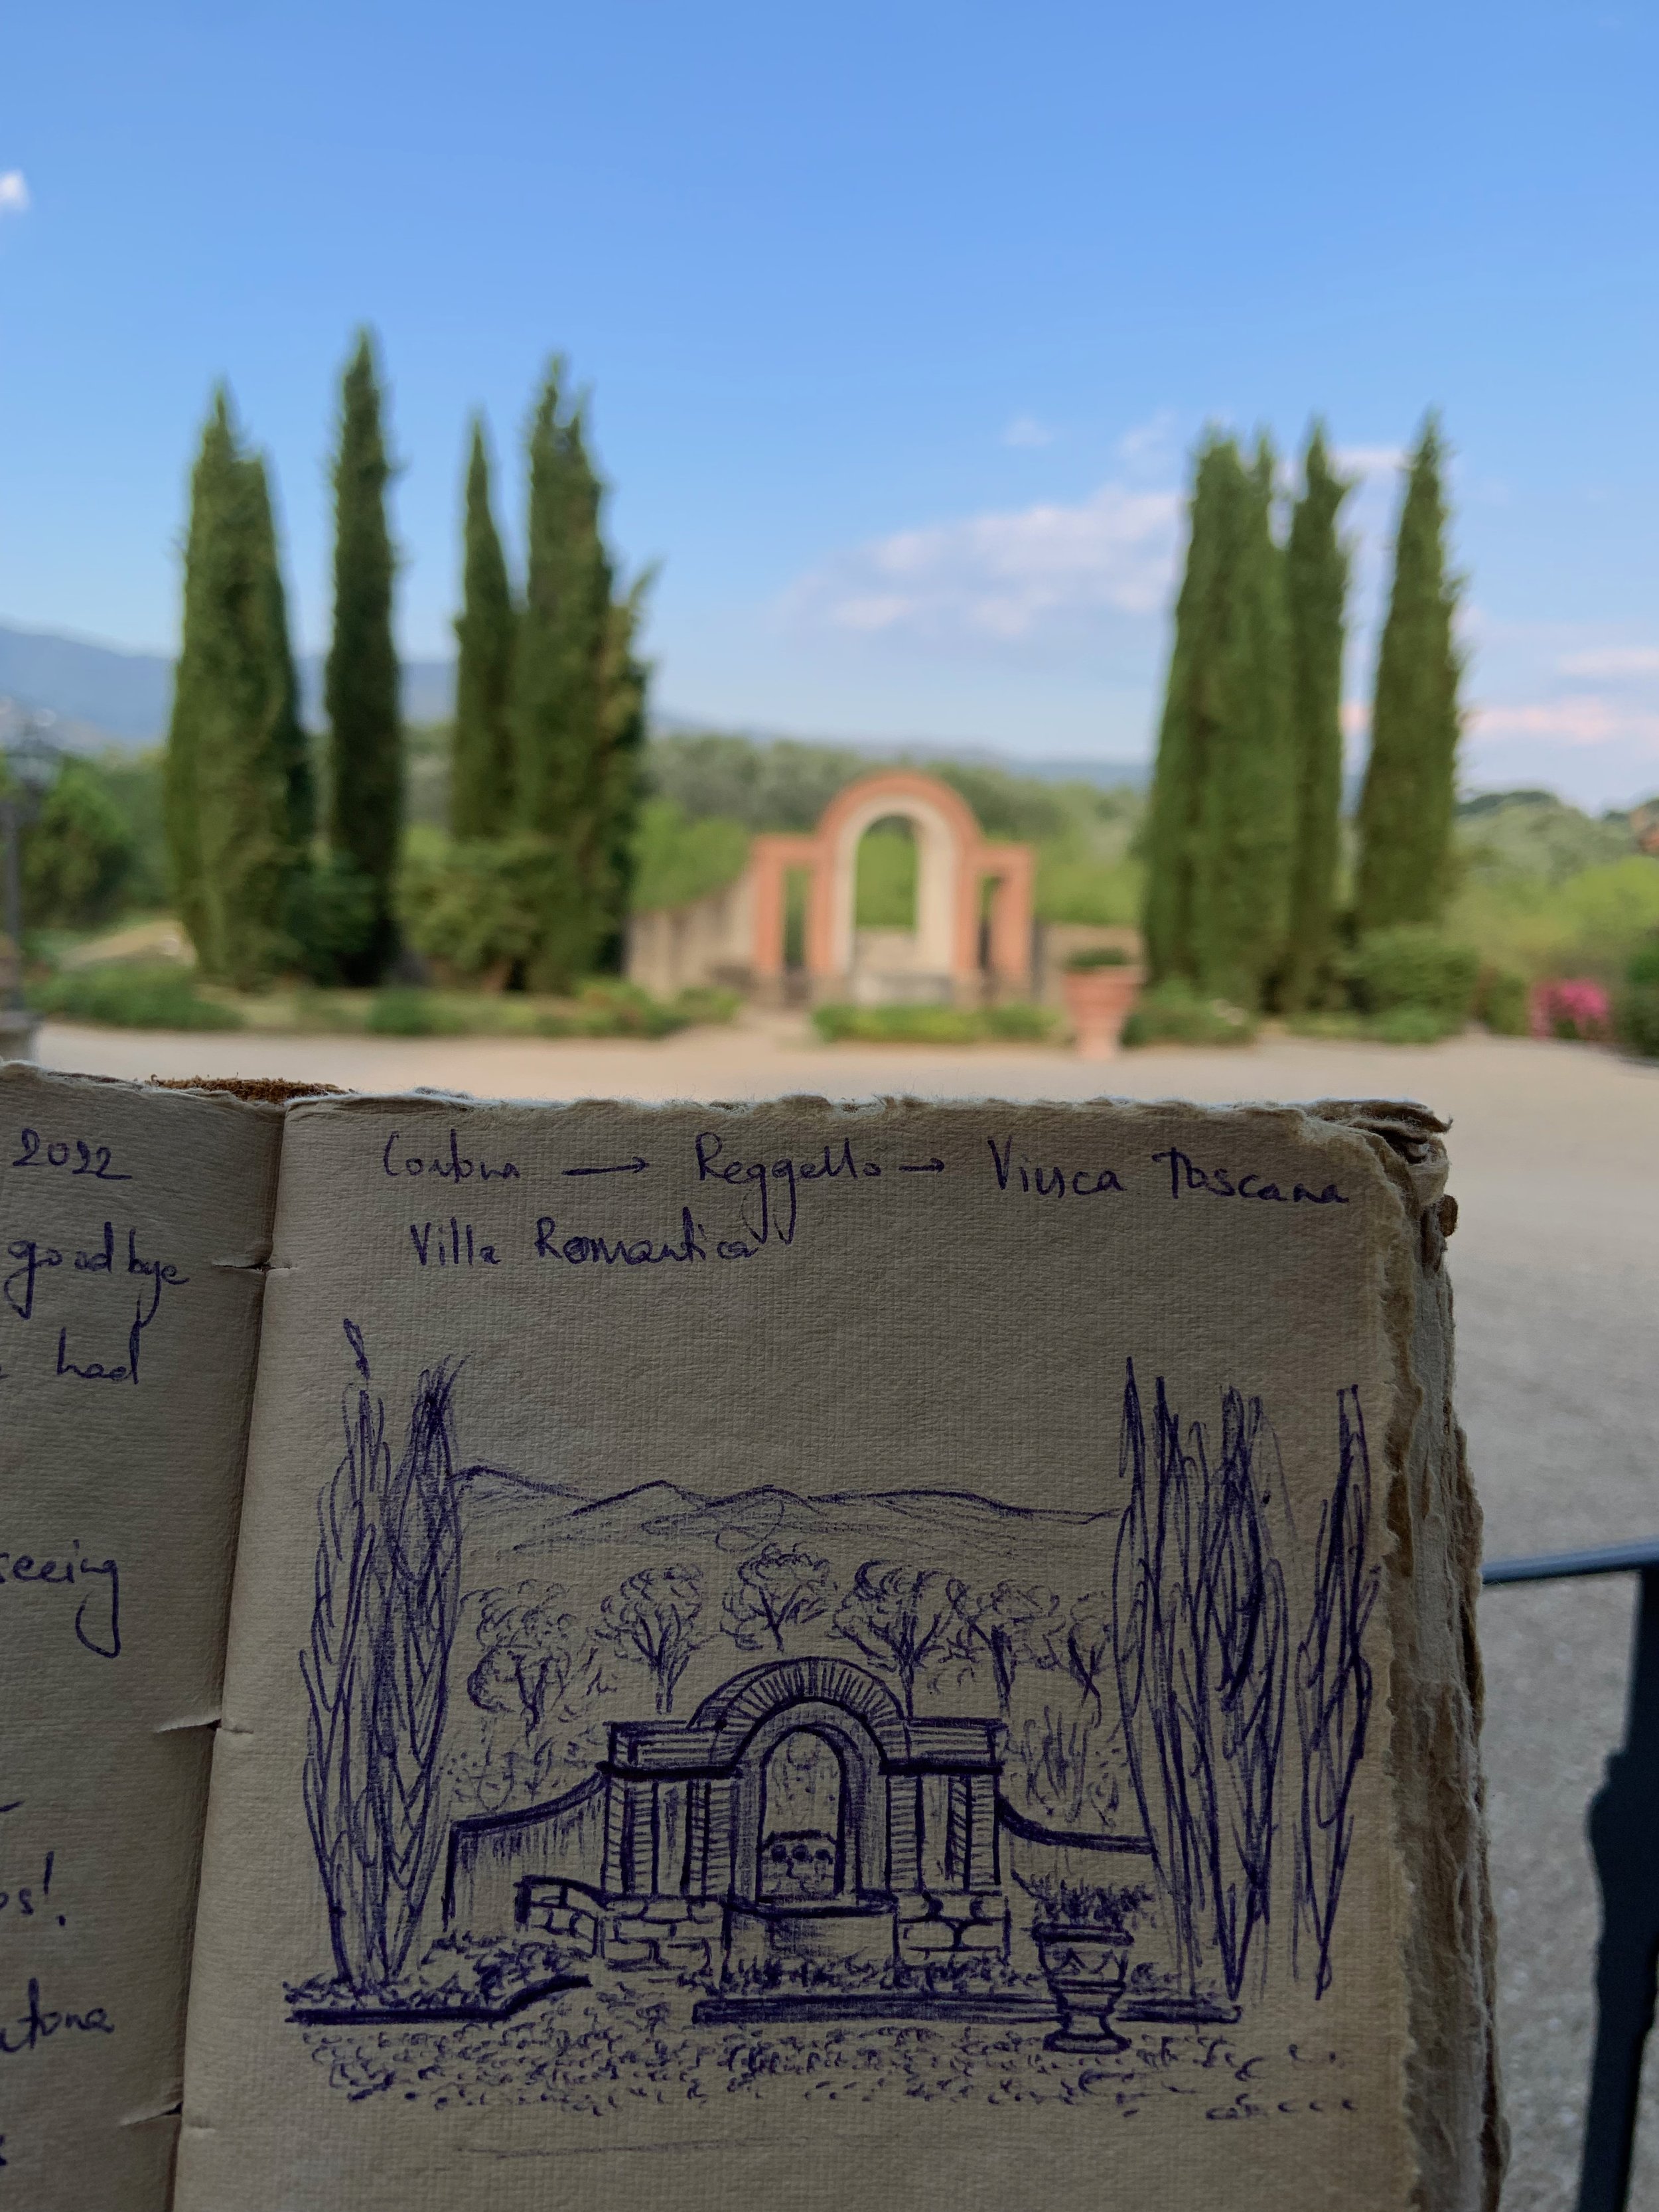 Continuing to sketch in Italy, but just managed this one